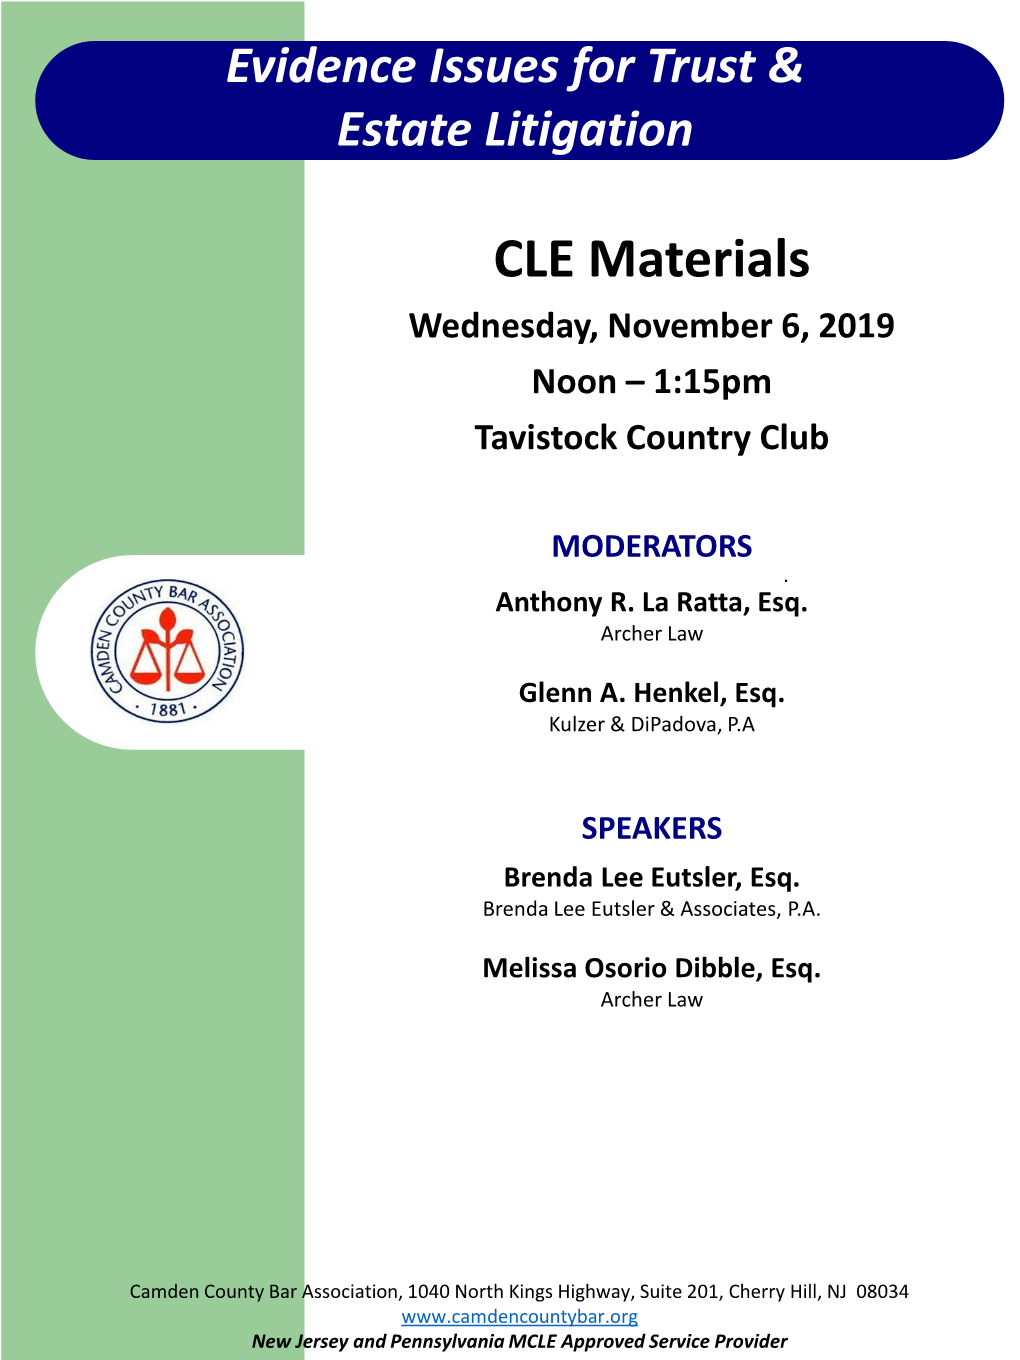 CLE Materials Wednesday, November 6, 2019 Noon – 1:15Pm Tavistock Country Club